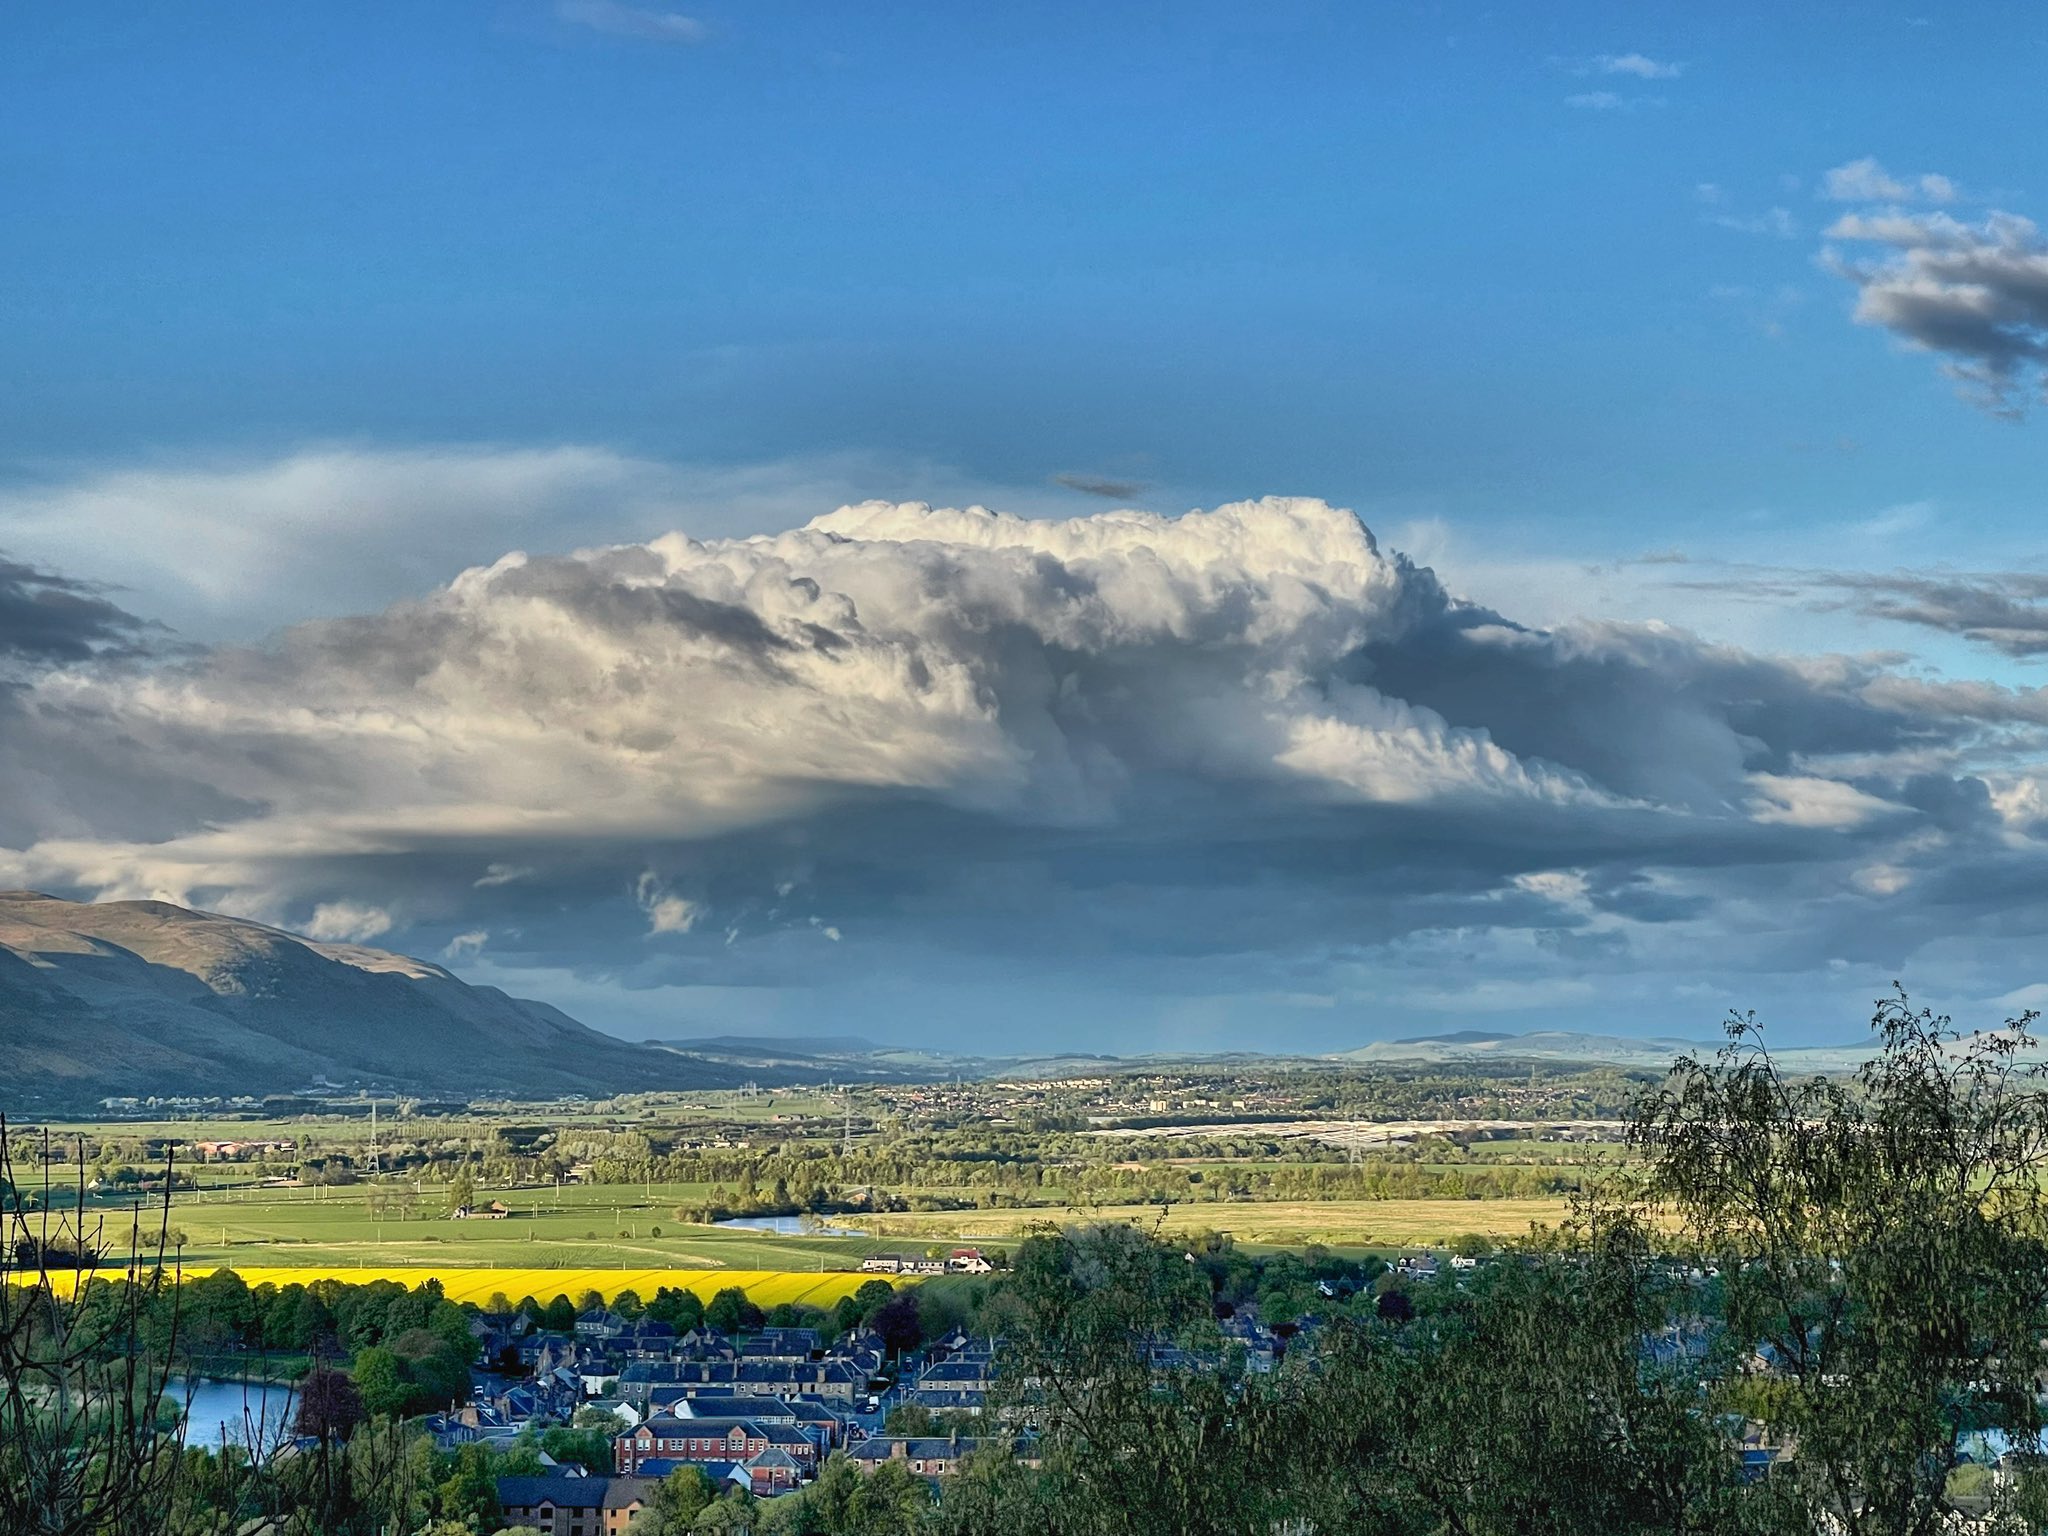 2nd Place The view from Stirling Castle Esplanade towards Dollar by Ian Barnes @Ian_Barnes